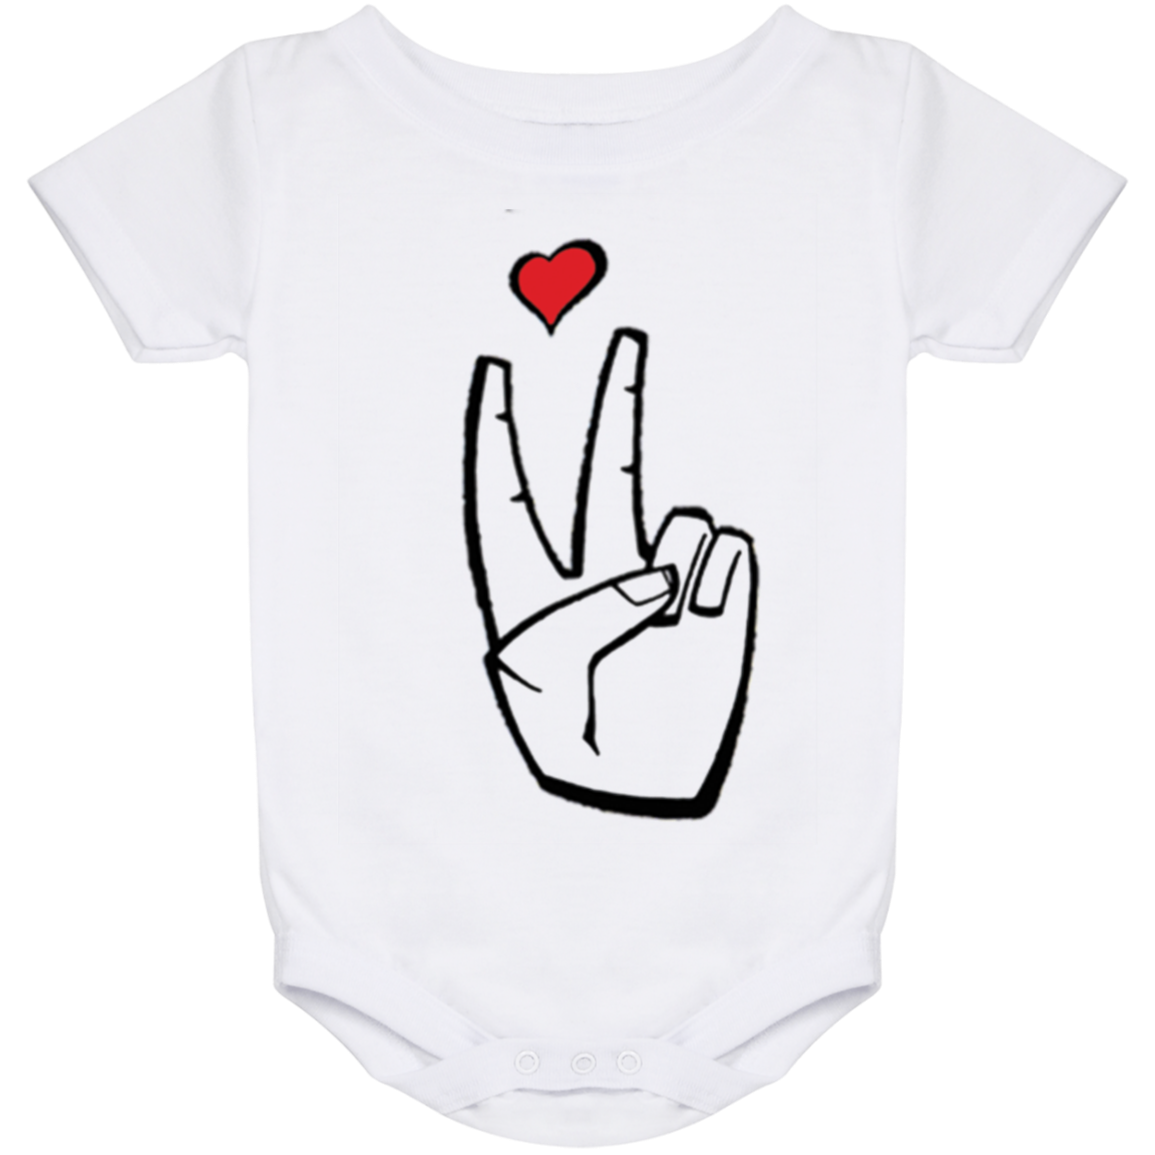 LoveAbove Baby Onesie 24 Month